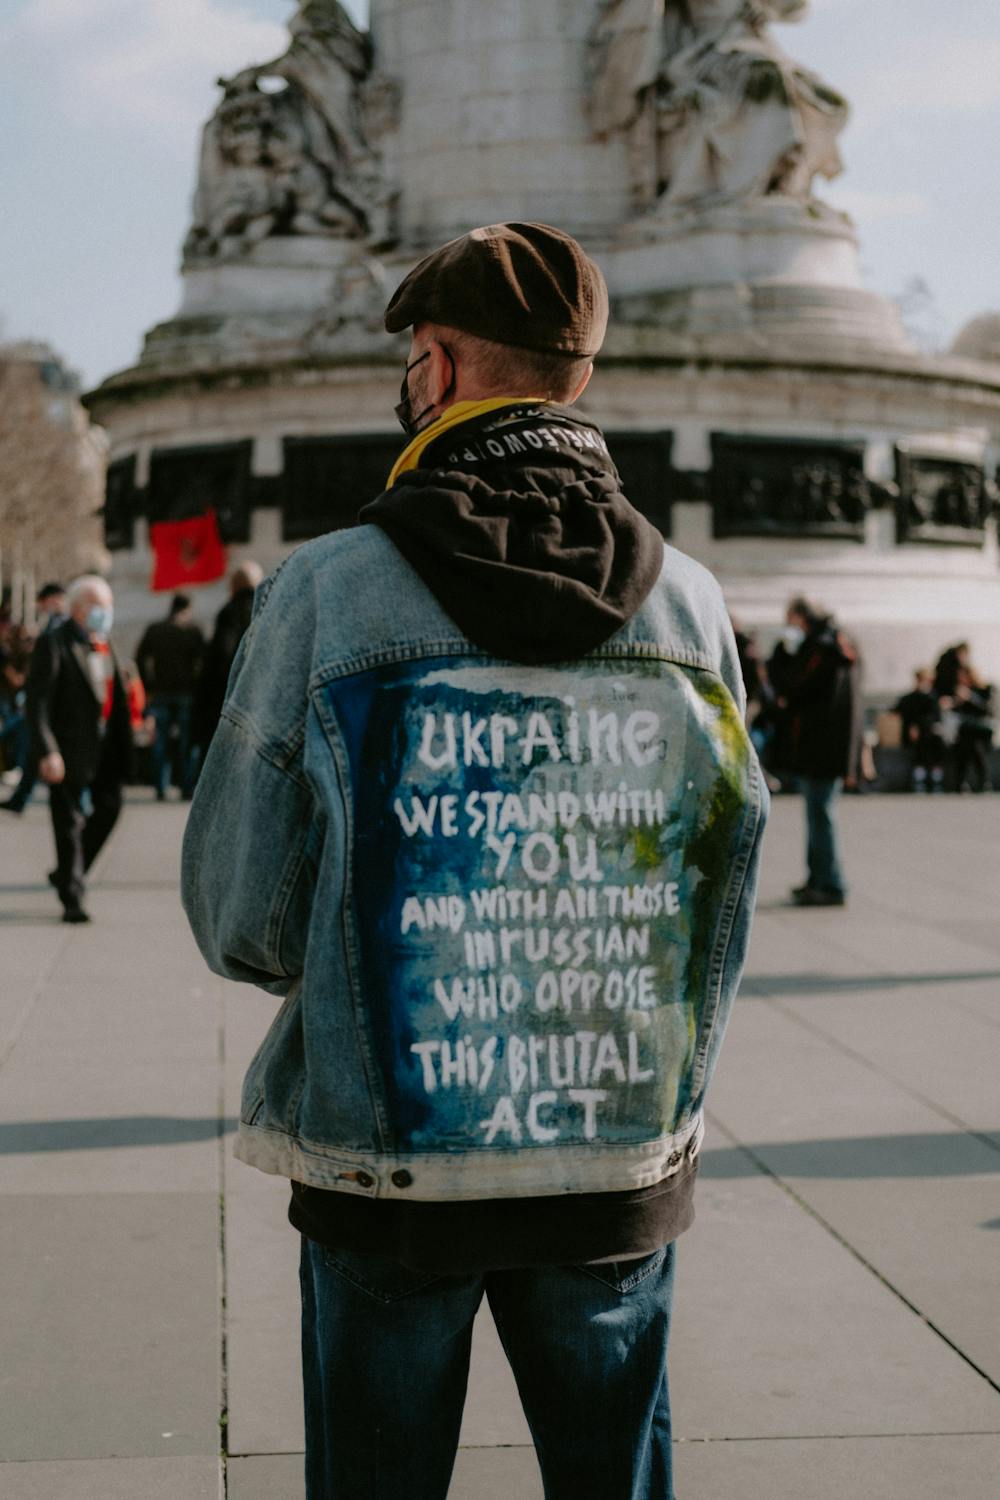 A man wears a jacket reading "Ukraine we stand with you and all those in Russia who oppose this brutal act."